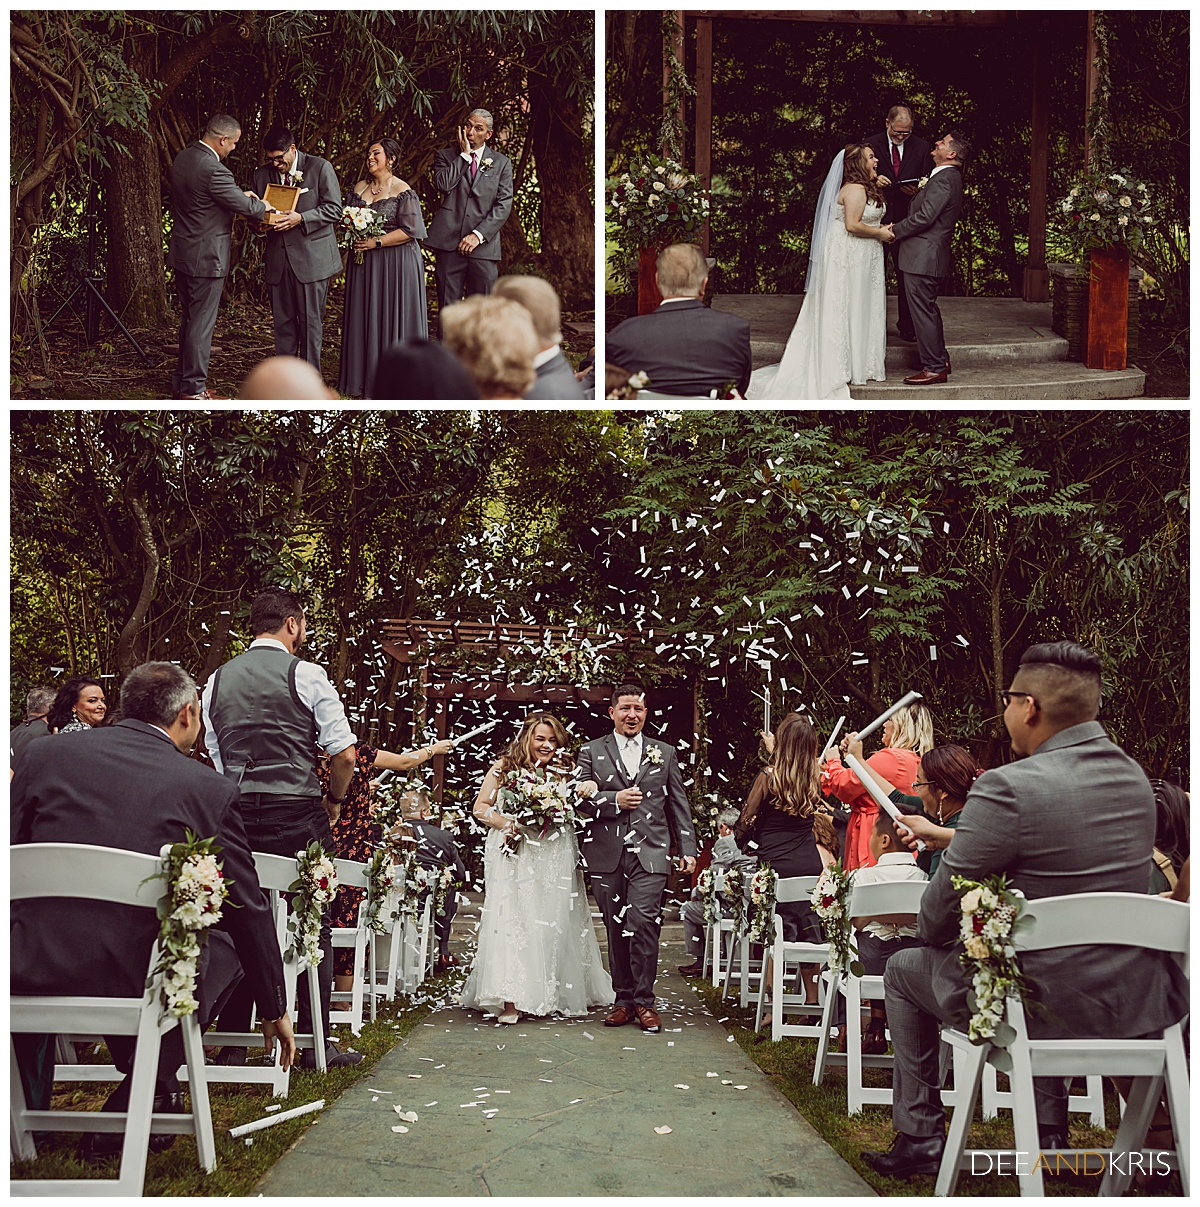 Three color images: Top left image of groom taking ring from security case held by best man. Top right image of bride and groom facing each other in laughter. Bottom image of Bride and Groom in recessional being showered by confetti by guests.